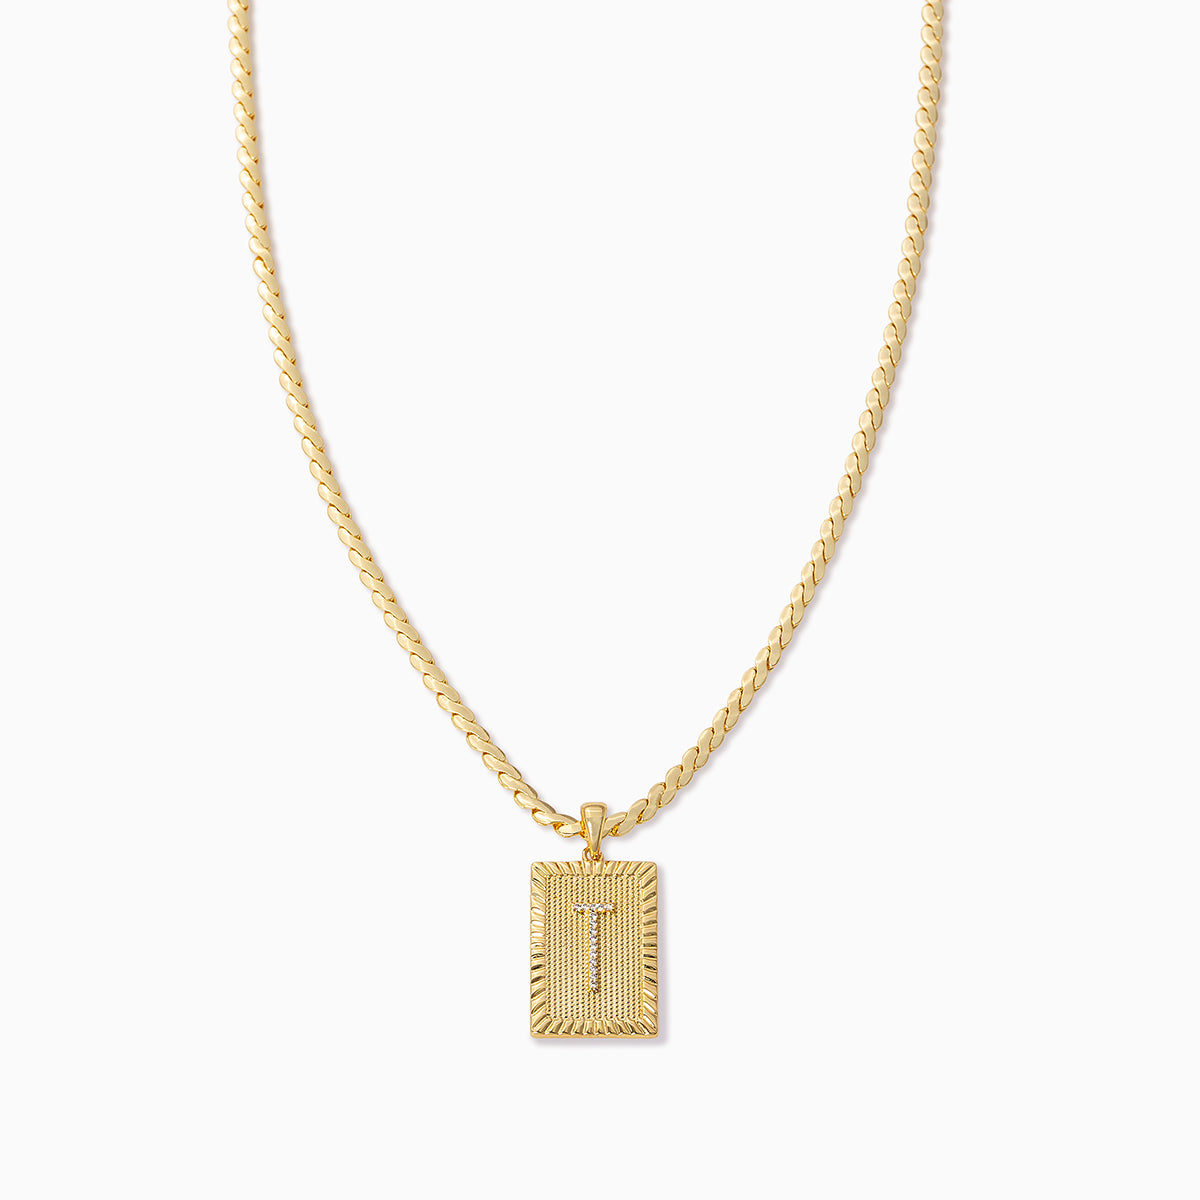 Buy Initial T Pendant with Gold Dori by RITIKA SACHDEVA at Ogaan Market  Online Shopping Site